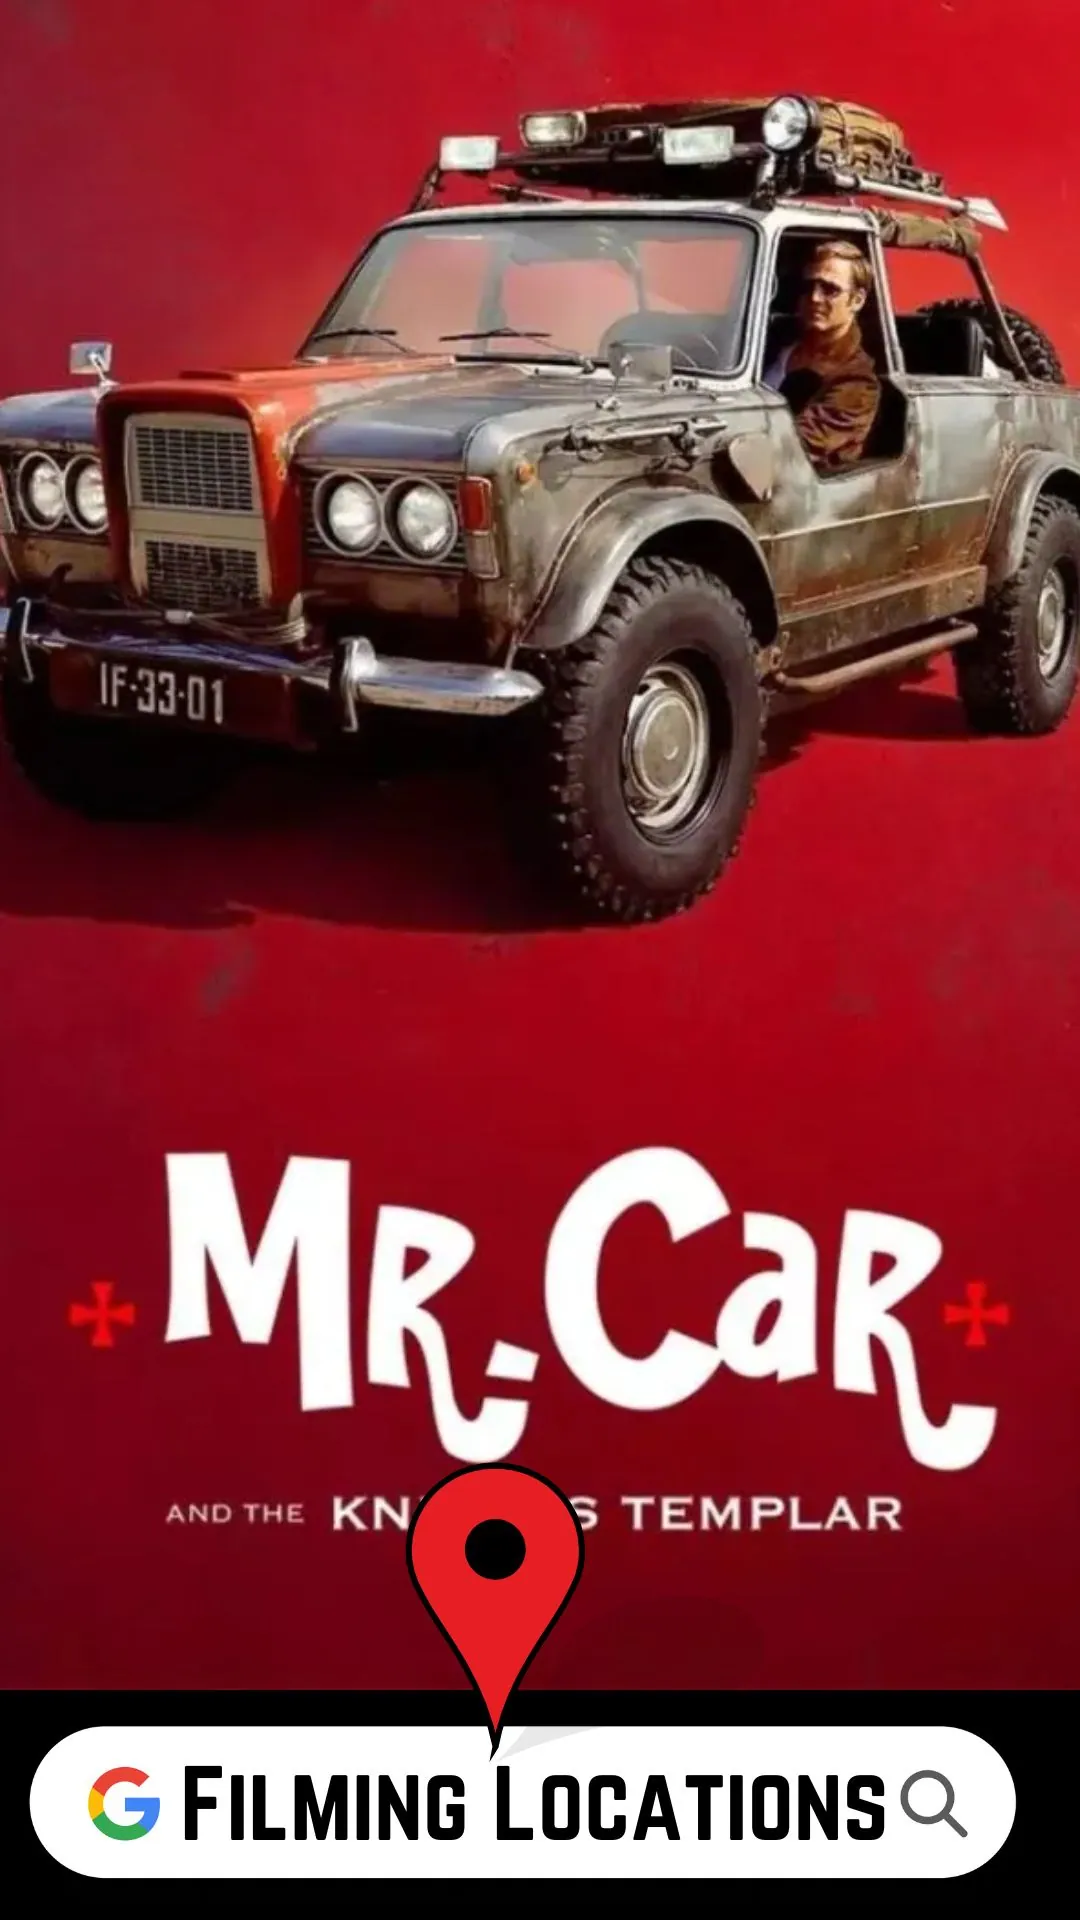 Mr. Car and the Knights Templar Filming Locations